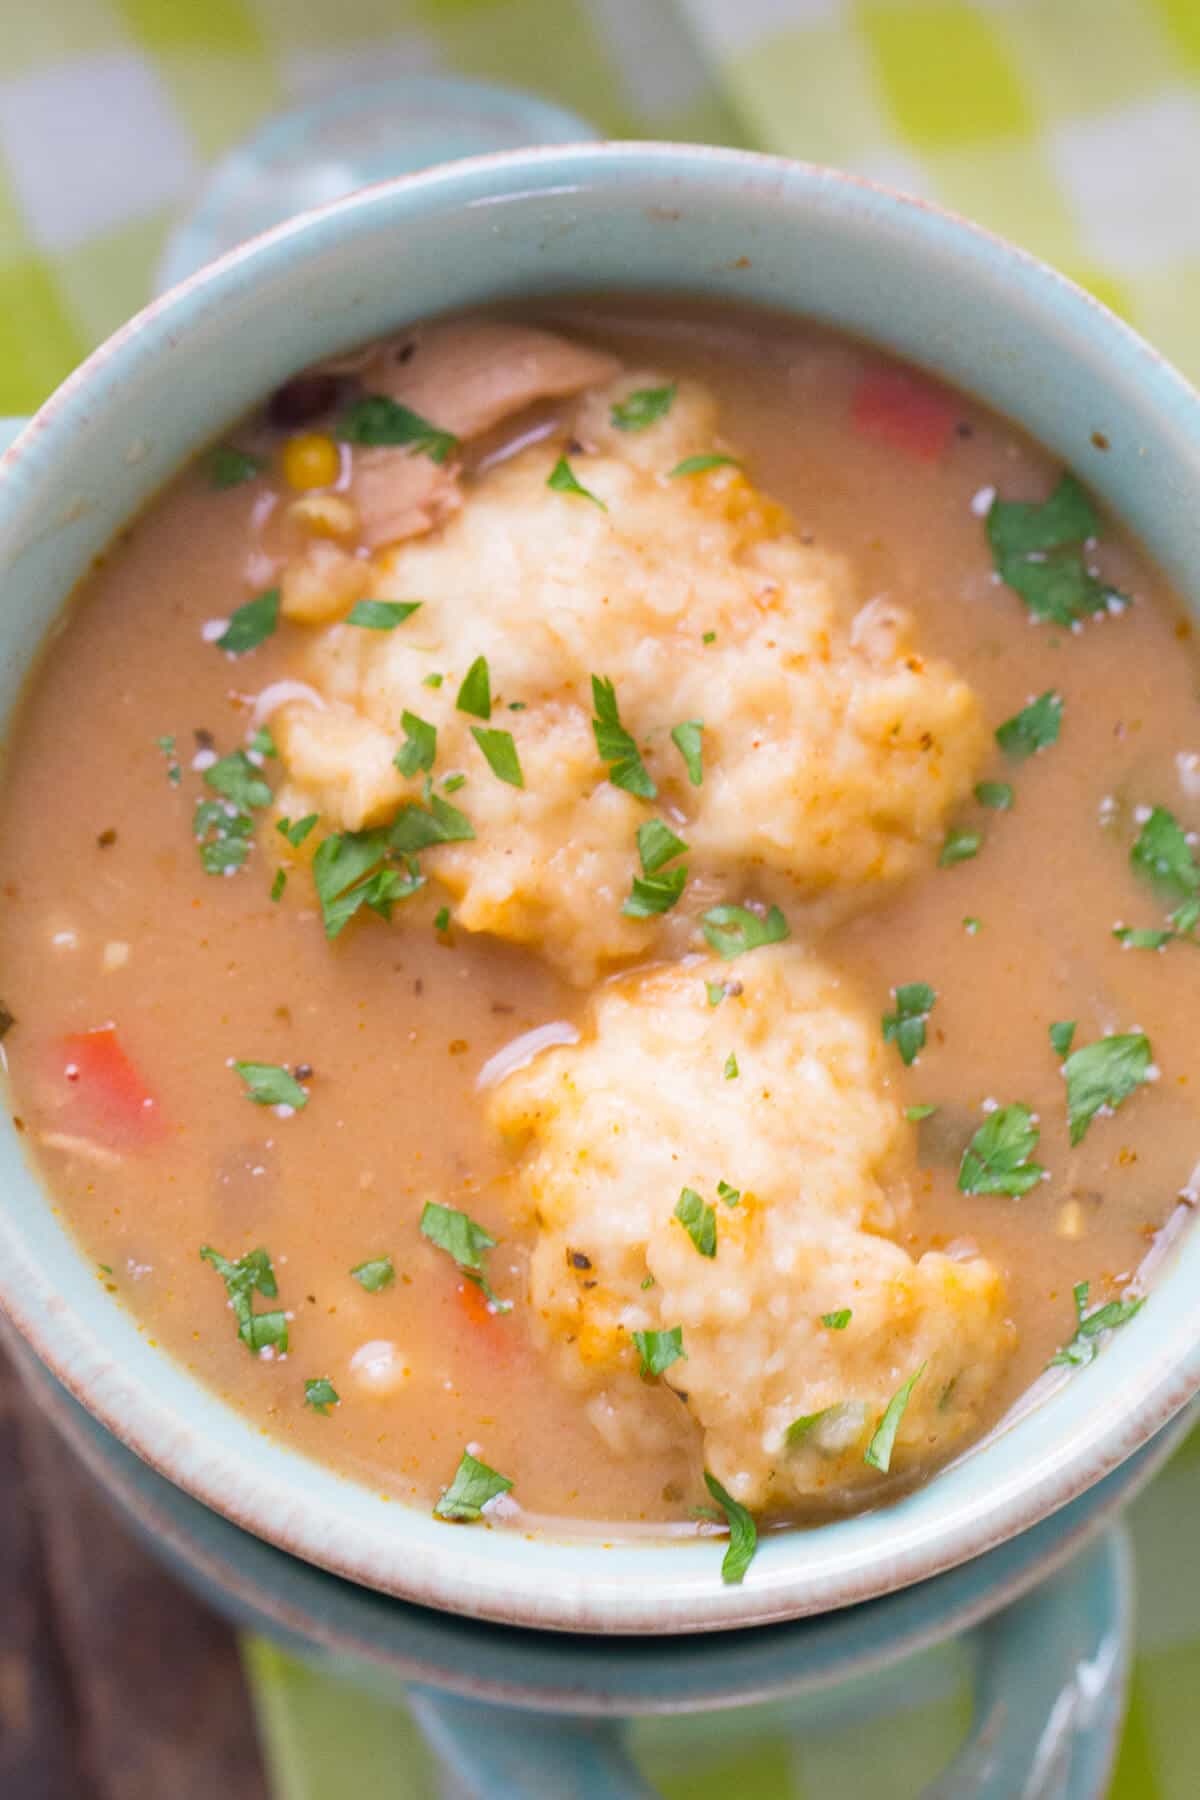 Chicken and dumplings get a modern update! This Tex-Mex version has lots of bold flavor!